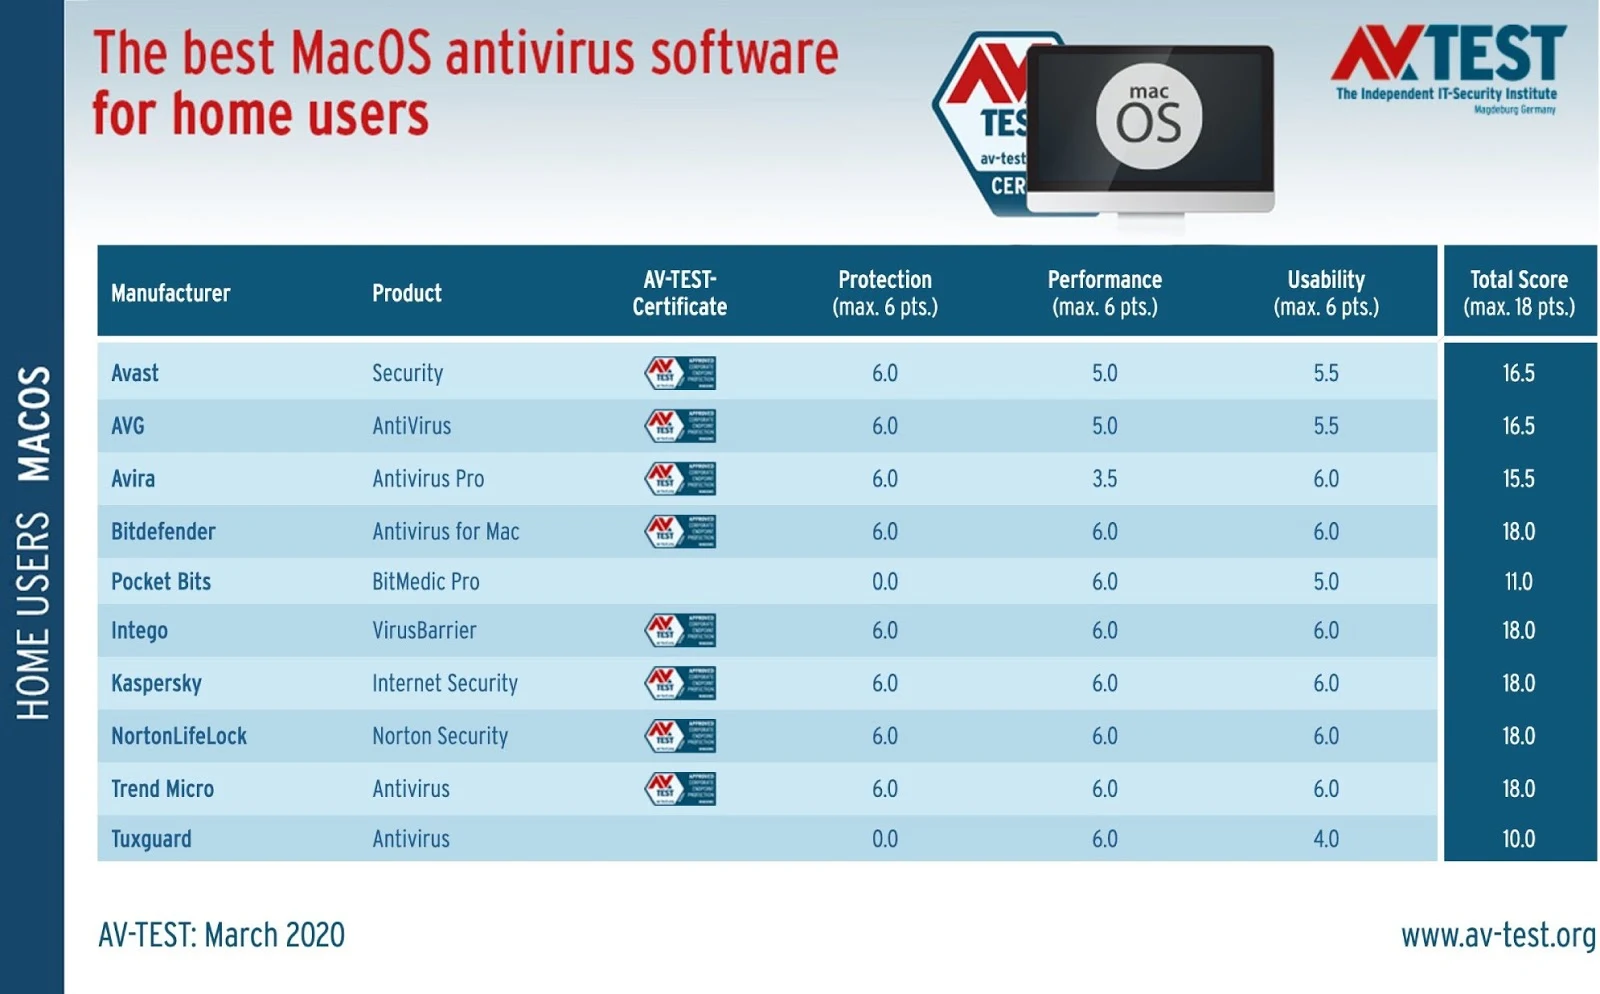 The best Mac antivirus software in 2020 for home users